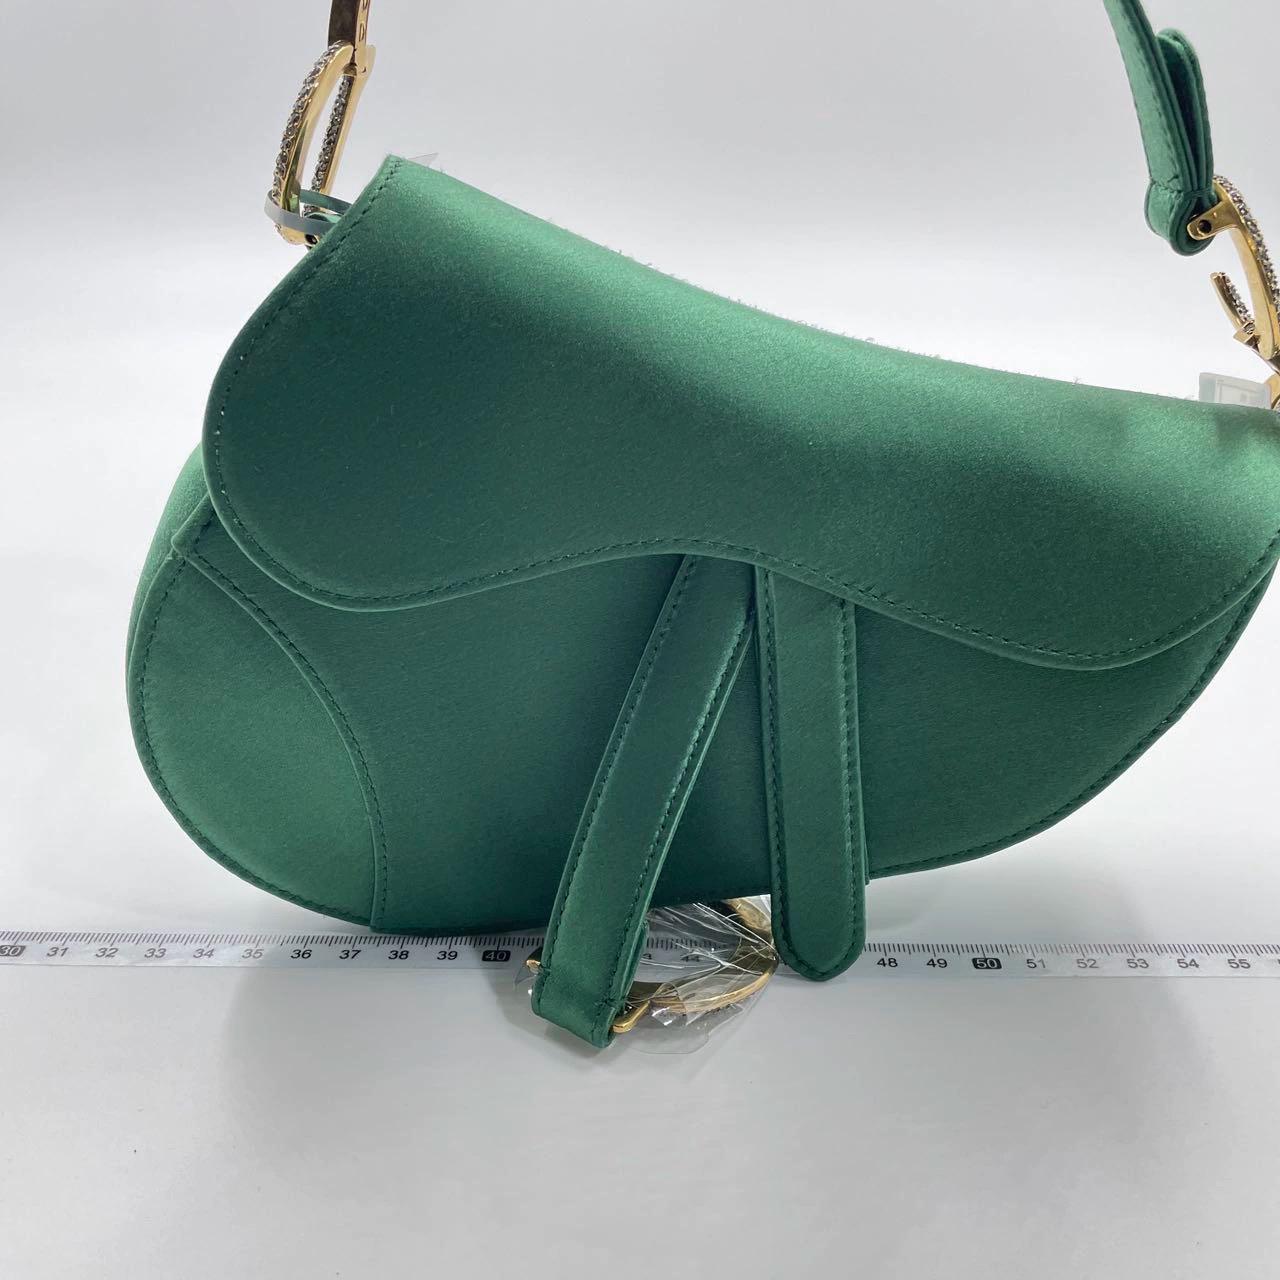 Dior Saddle bag, crafted in Emerald Green silk satin, the legendary design comes in size mini, features a magnetic flap, and bedazzling crystal embellished CD signature on both sides of the strap. The Saddle bag may be carried by hand. 

The silk